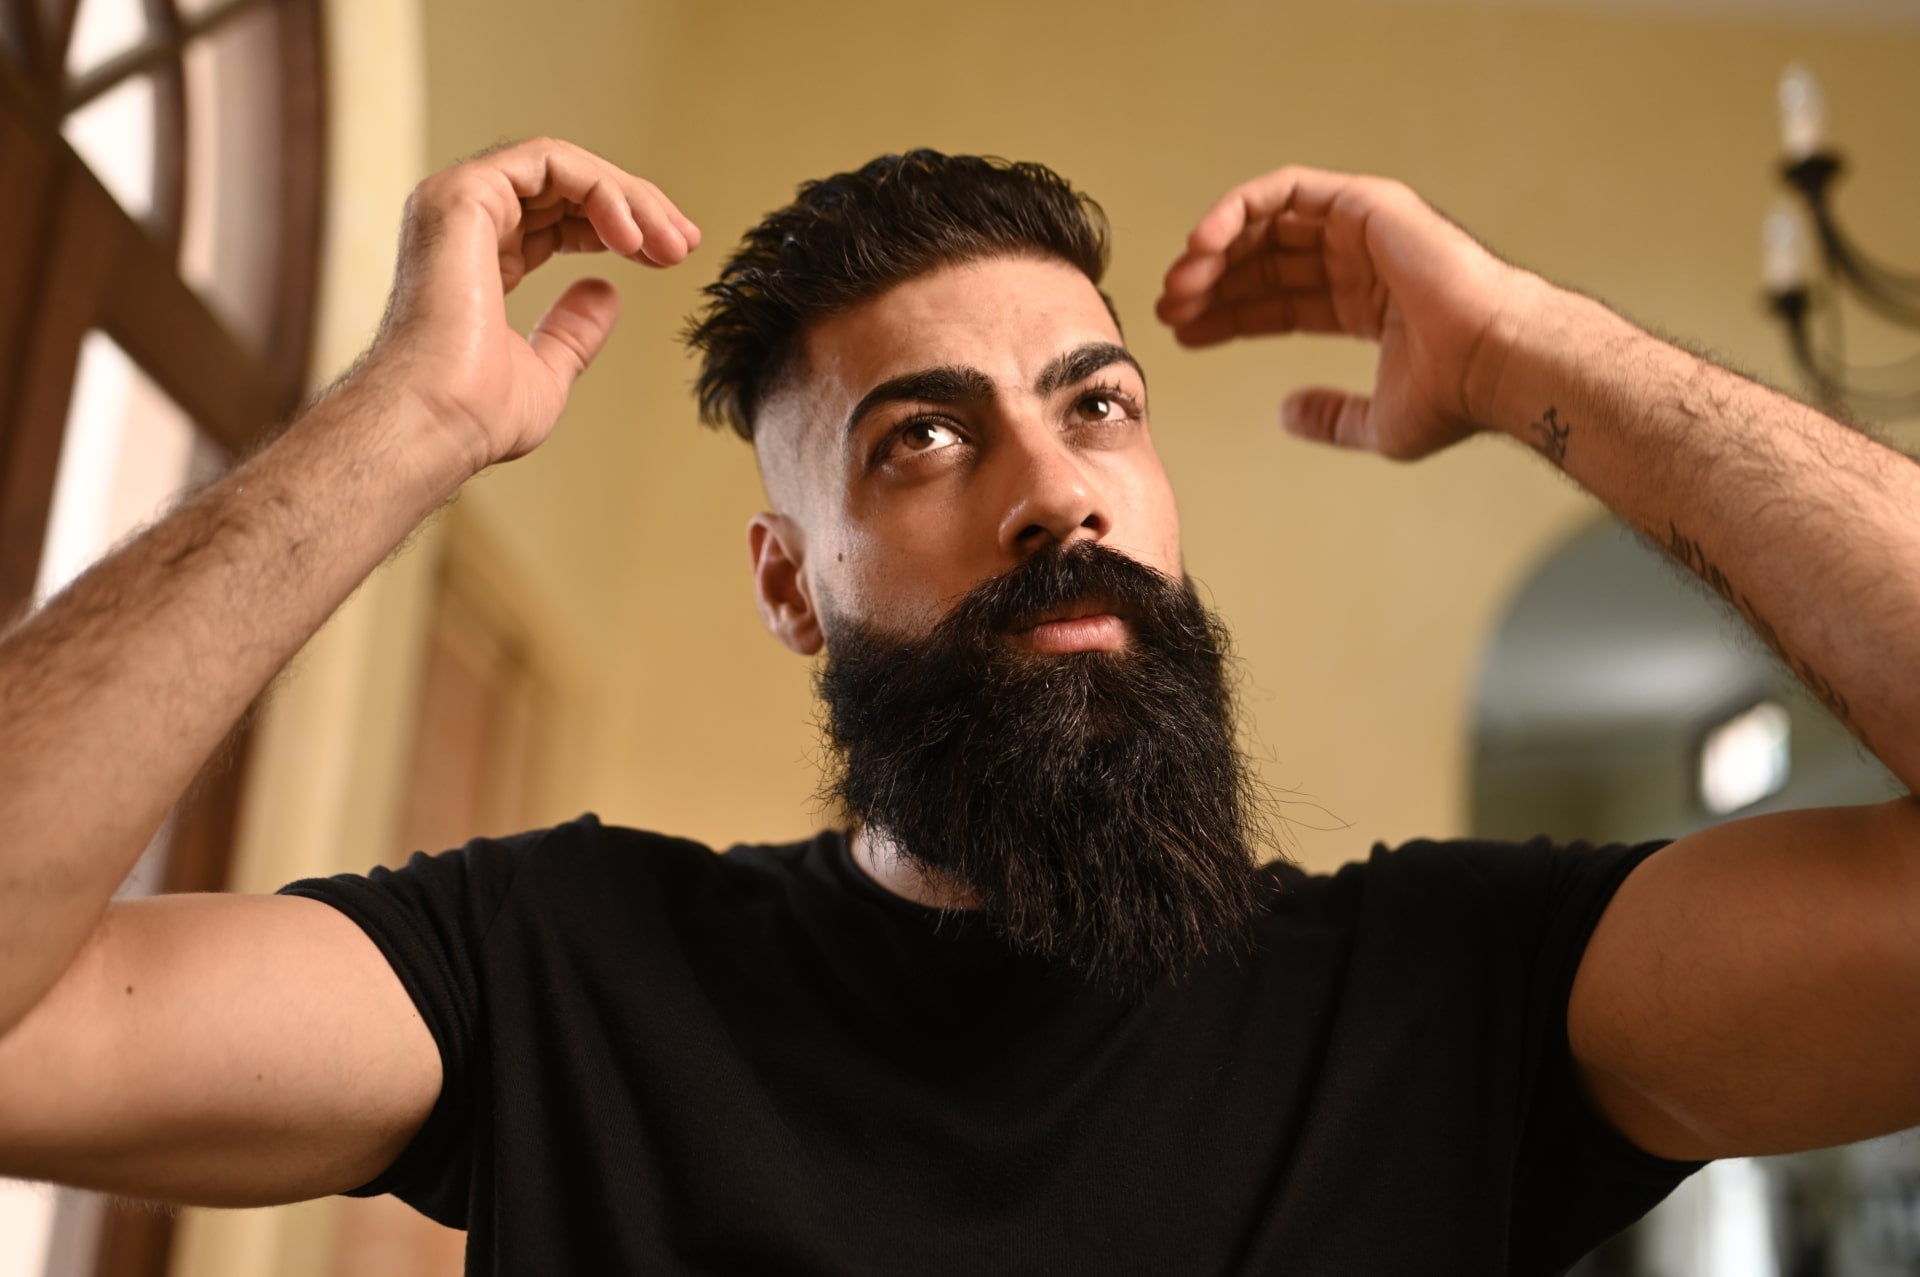 Why is promoting sustainable beard grooming important? 2